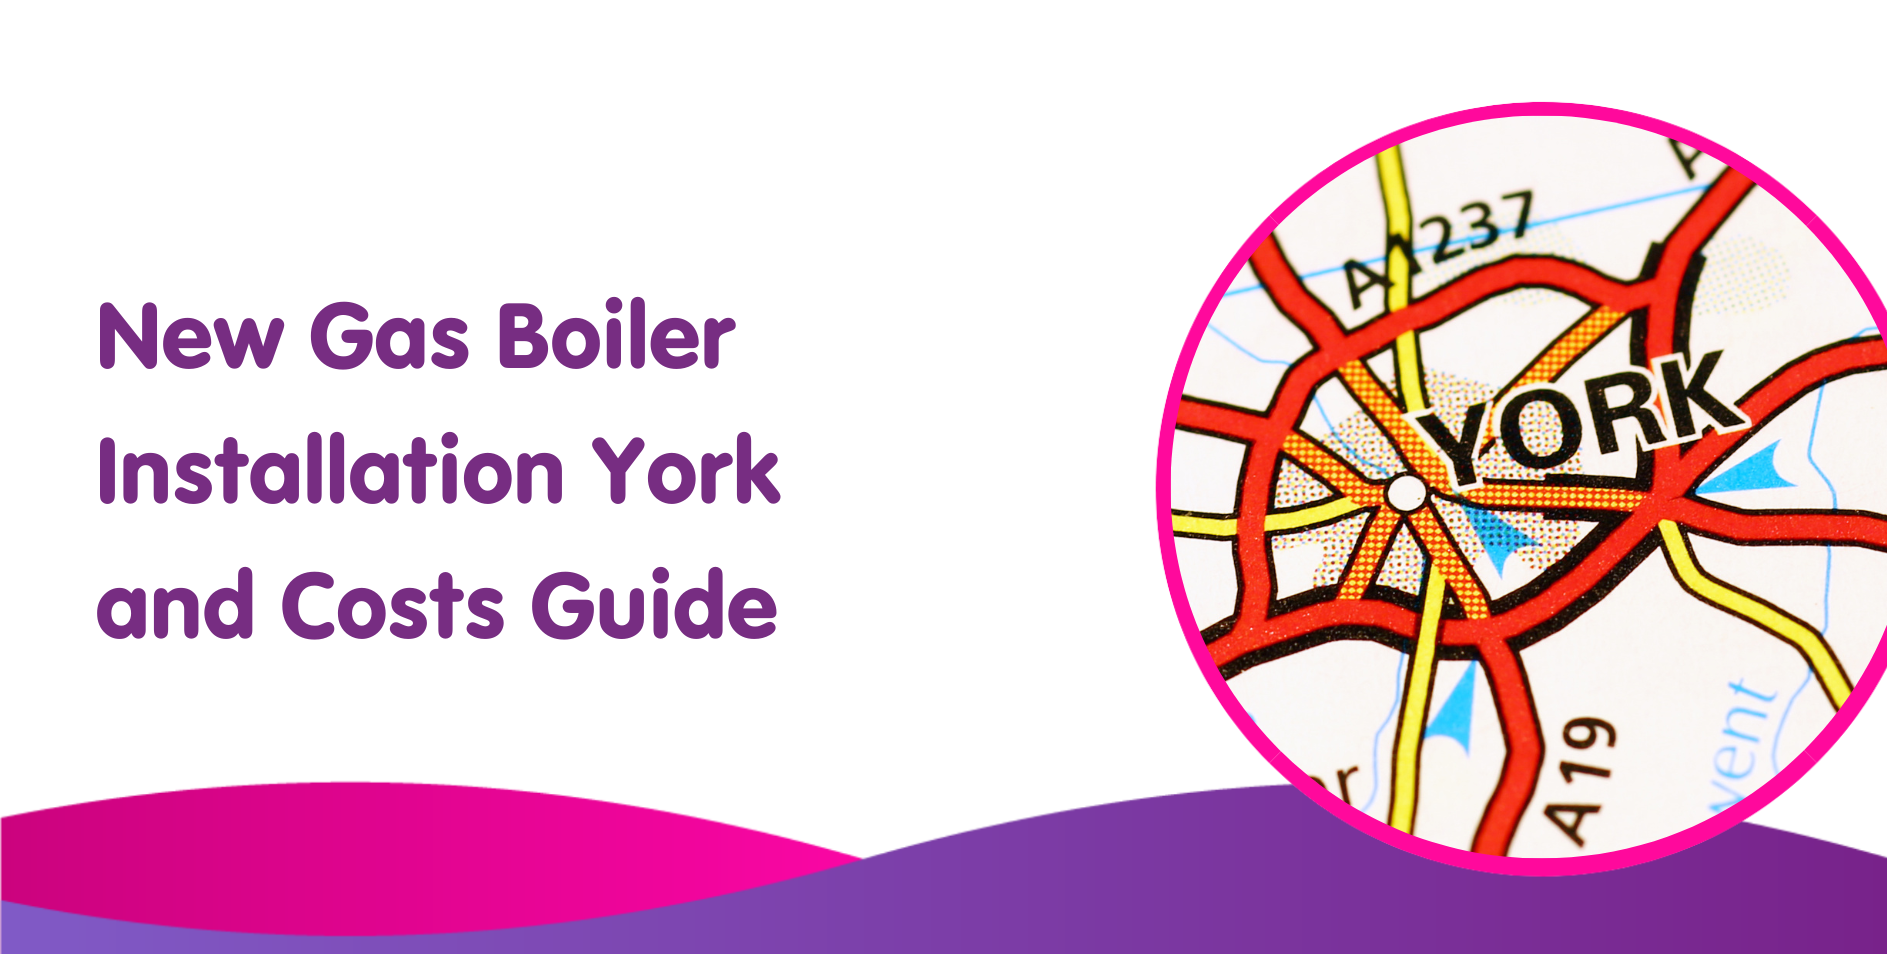 New Gas Boiler Installation York and Costs Guide